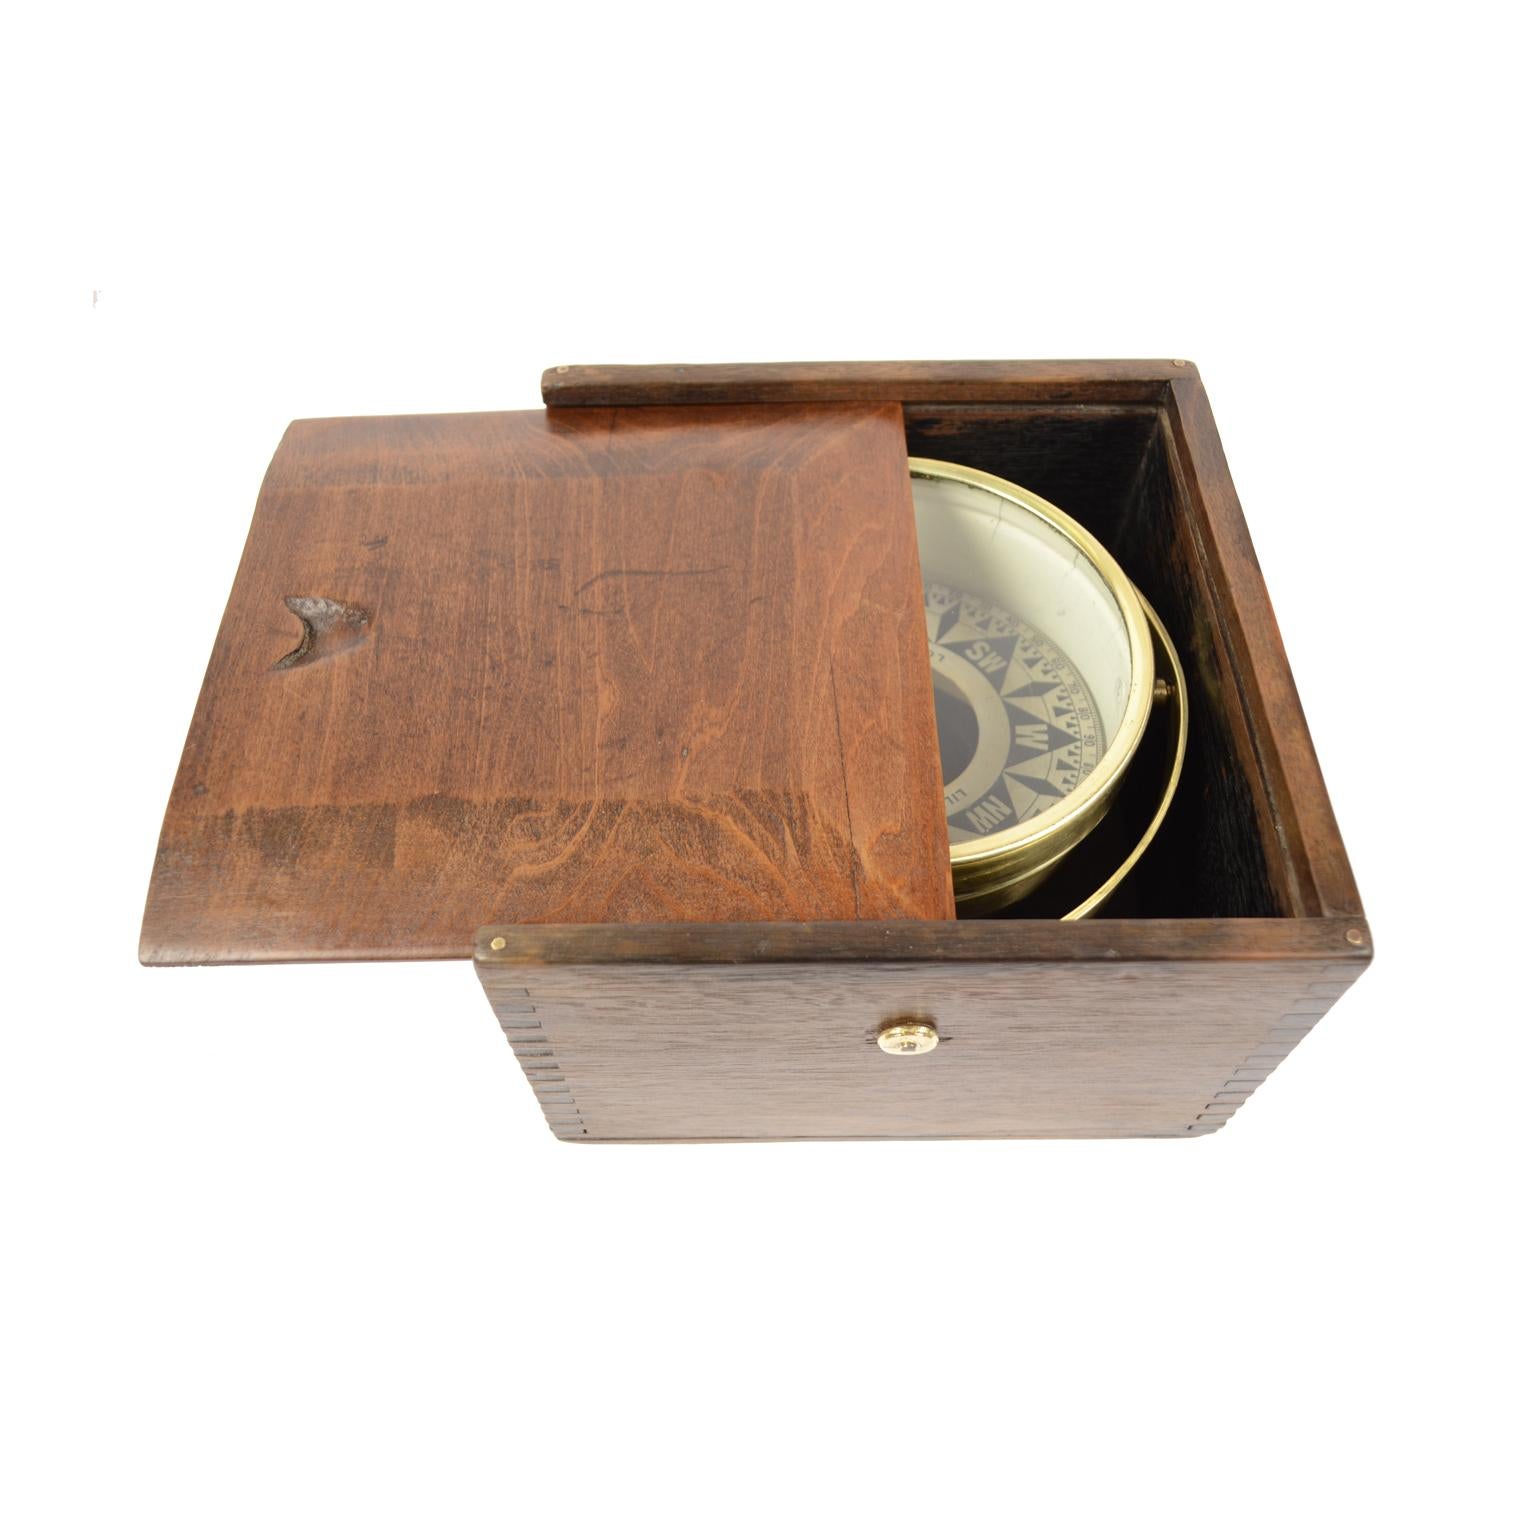 British Compass Lilley & Reynolds Ltd London Made in 1930s in Its Original Wooden Box